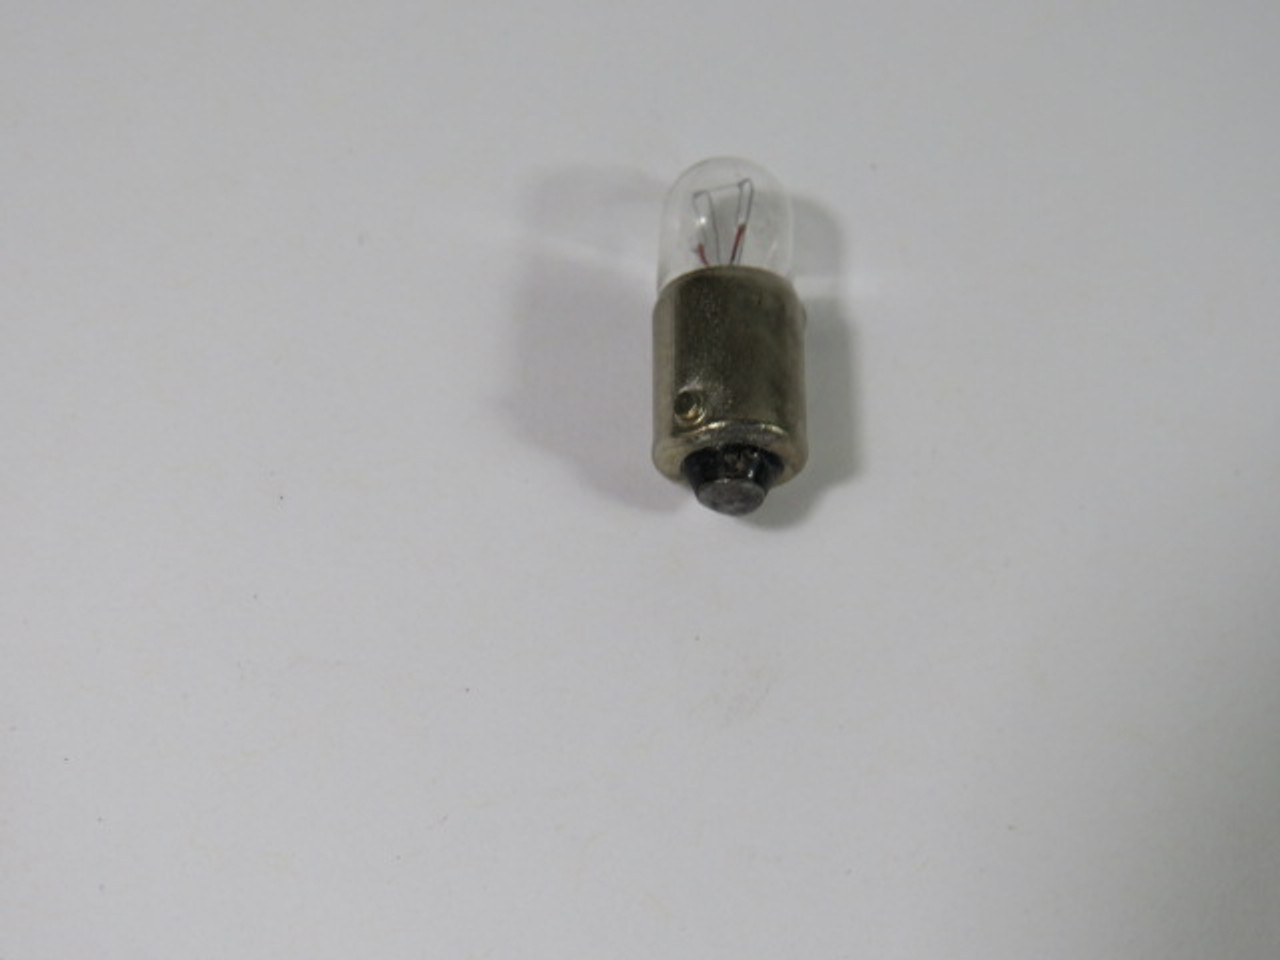 Siemens 3SX1-344 Incandescent Lamp 24V USED